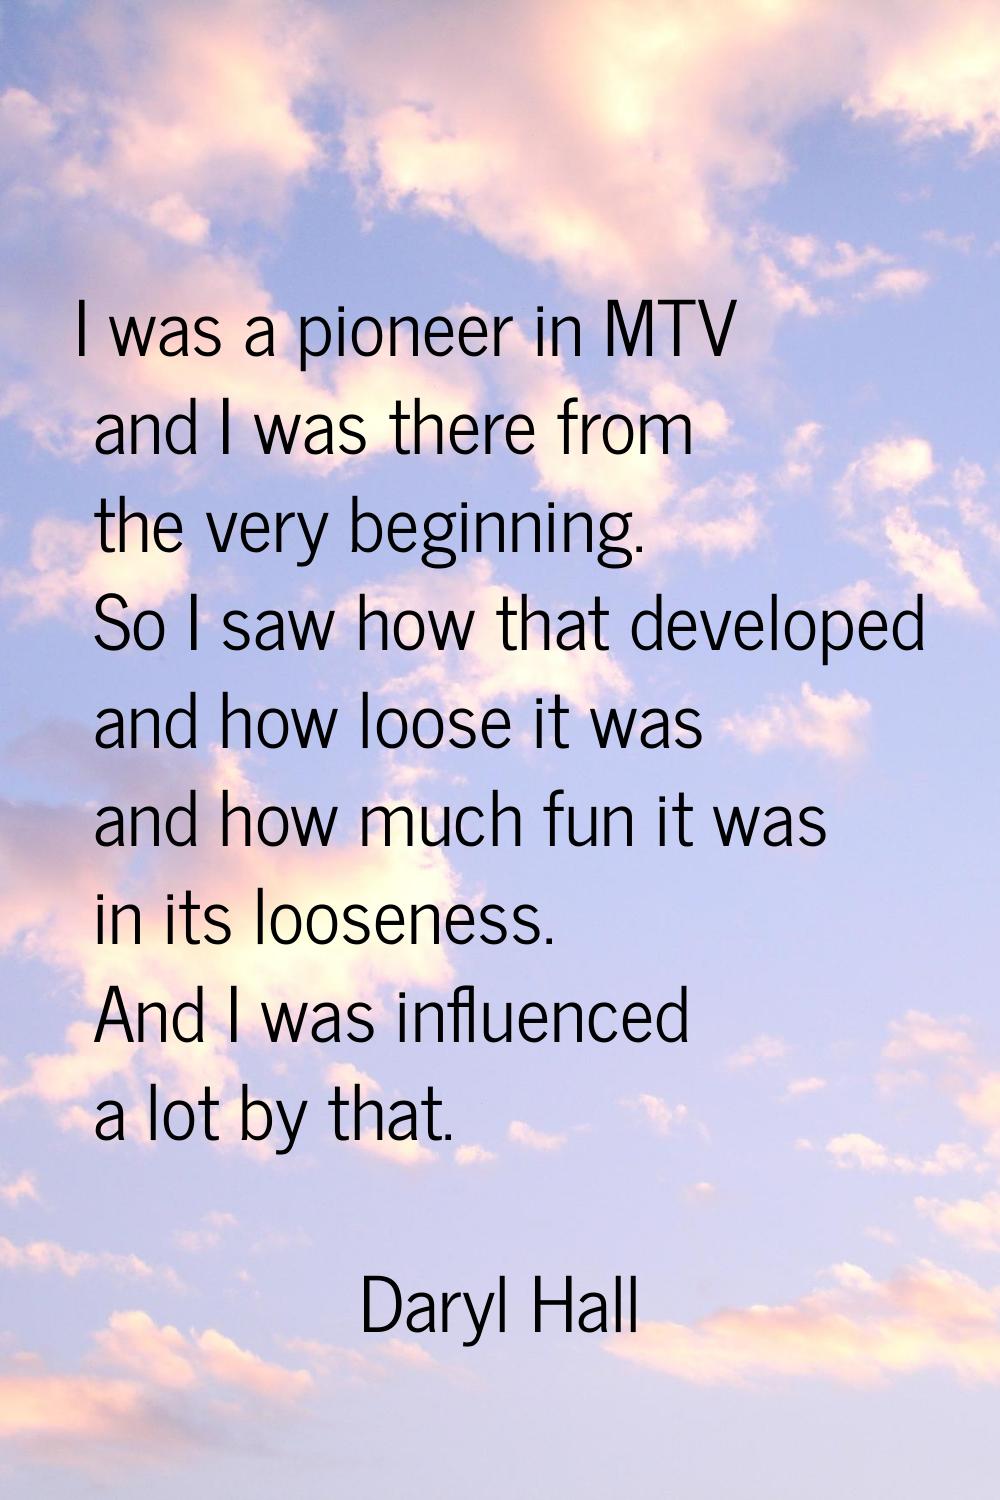 I was a pioneer in MTV and I was there from the very beginning. So I saw how that developed and how